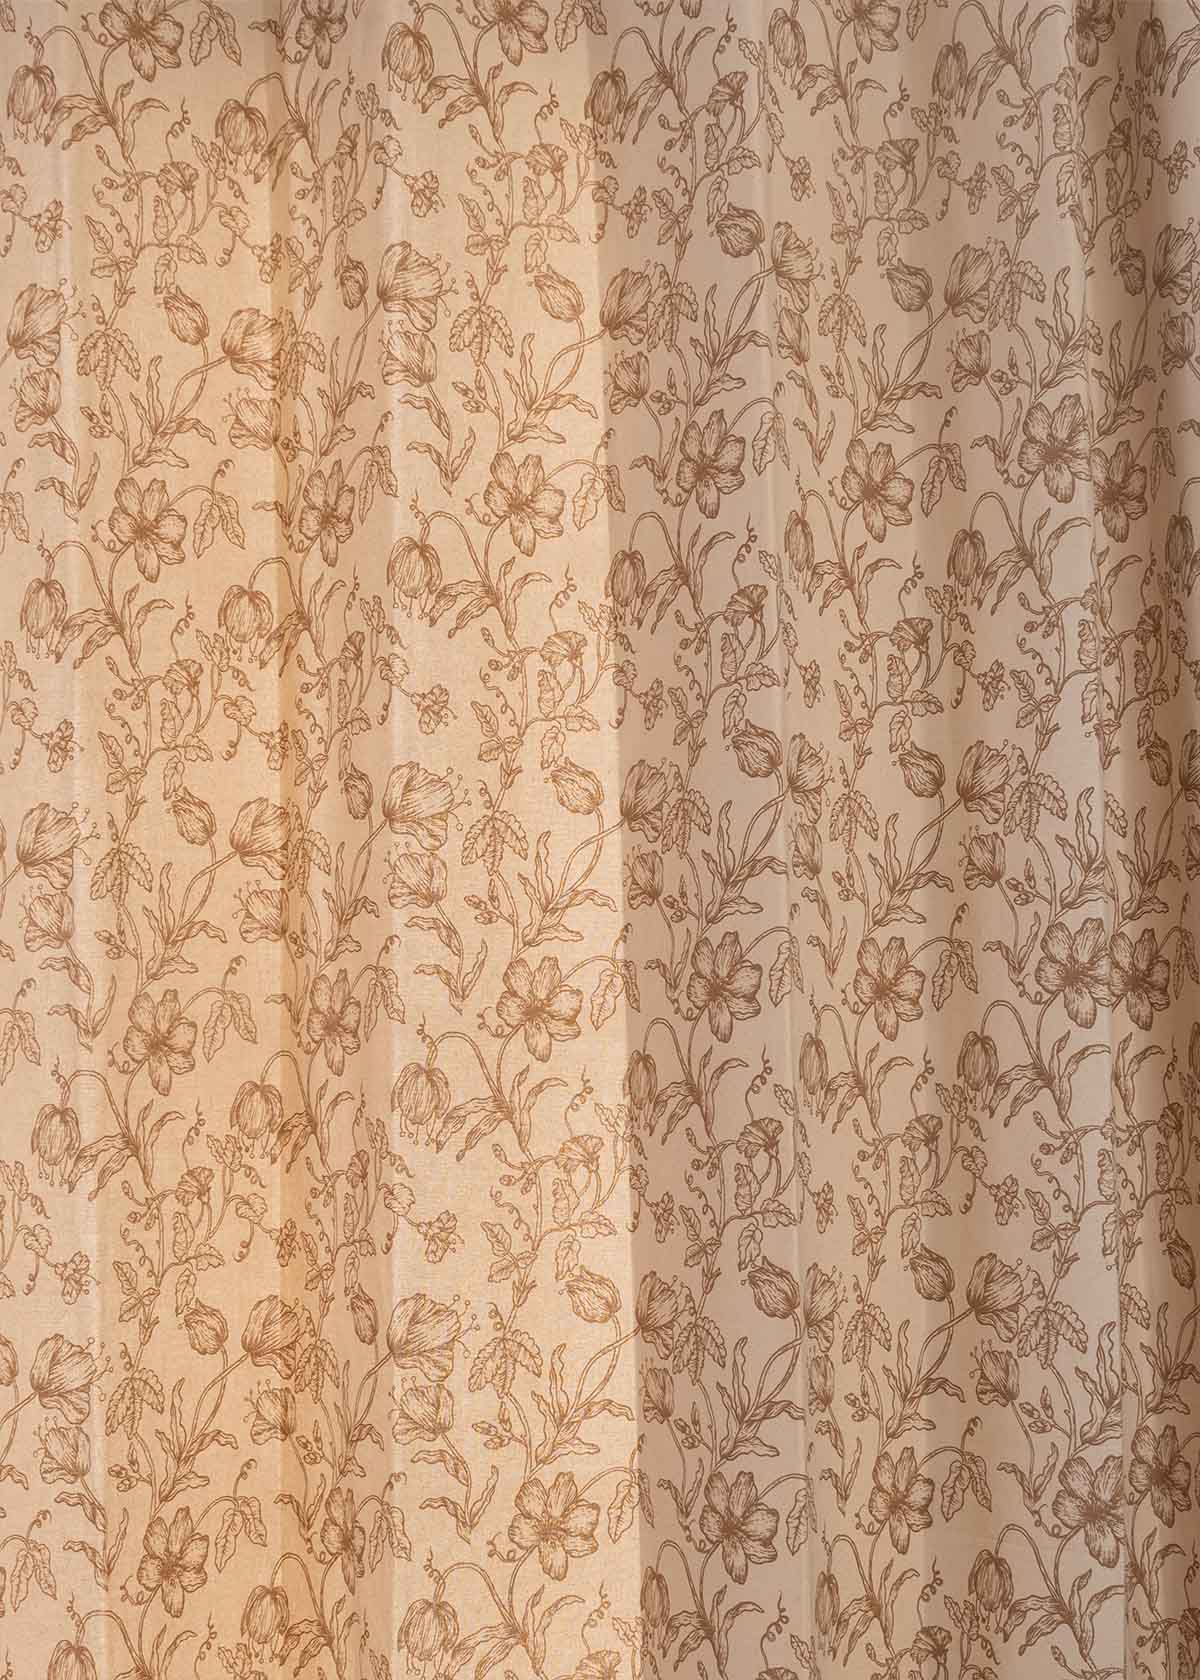 French Farmhouse printed cotton Fabric - Beige